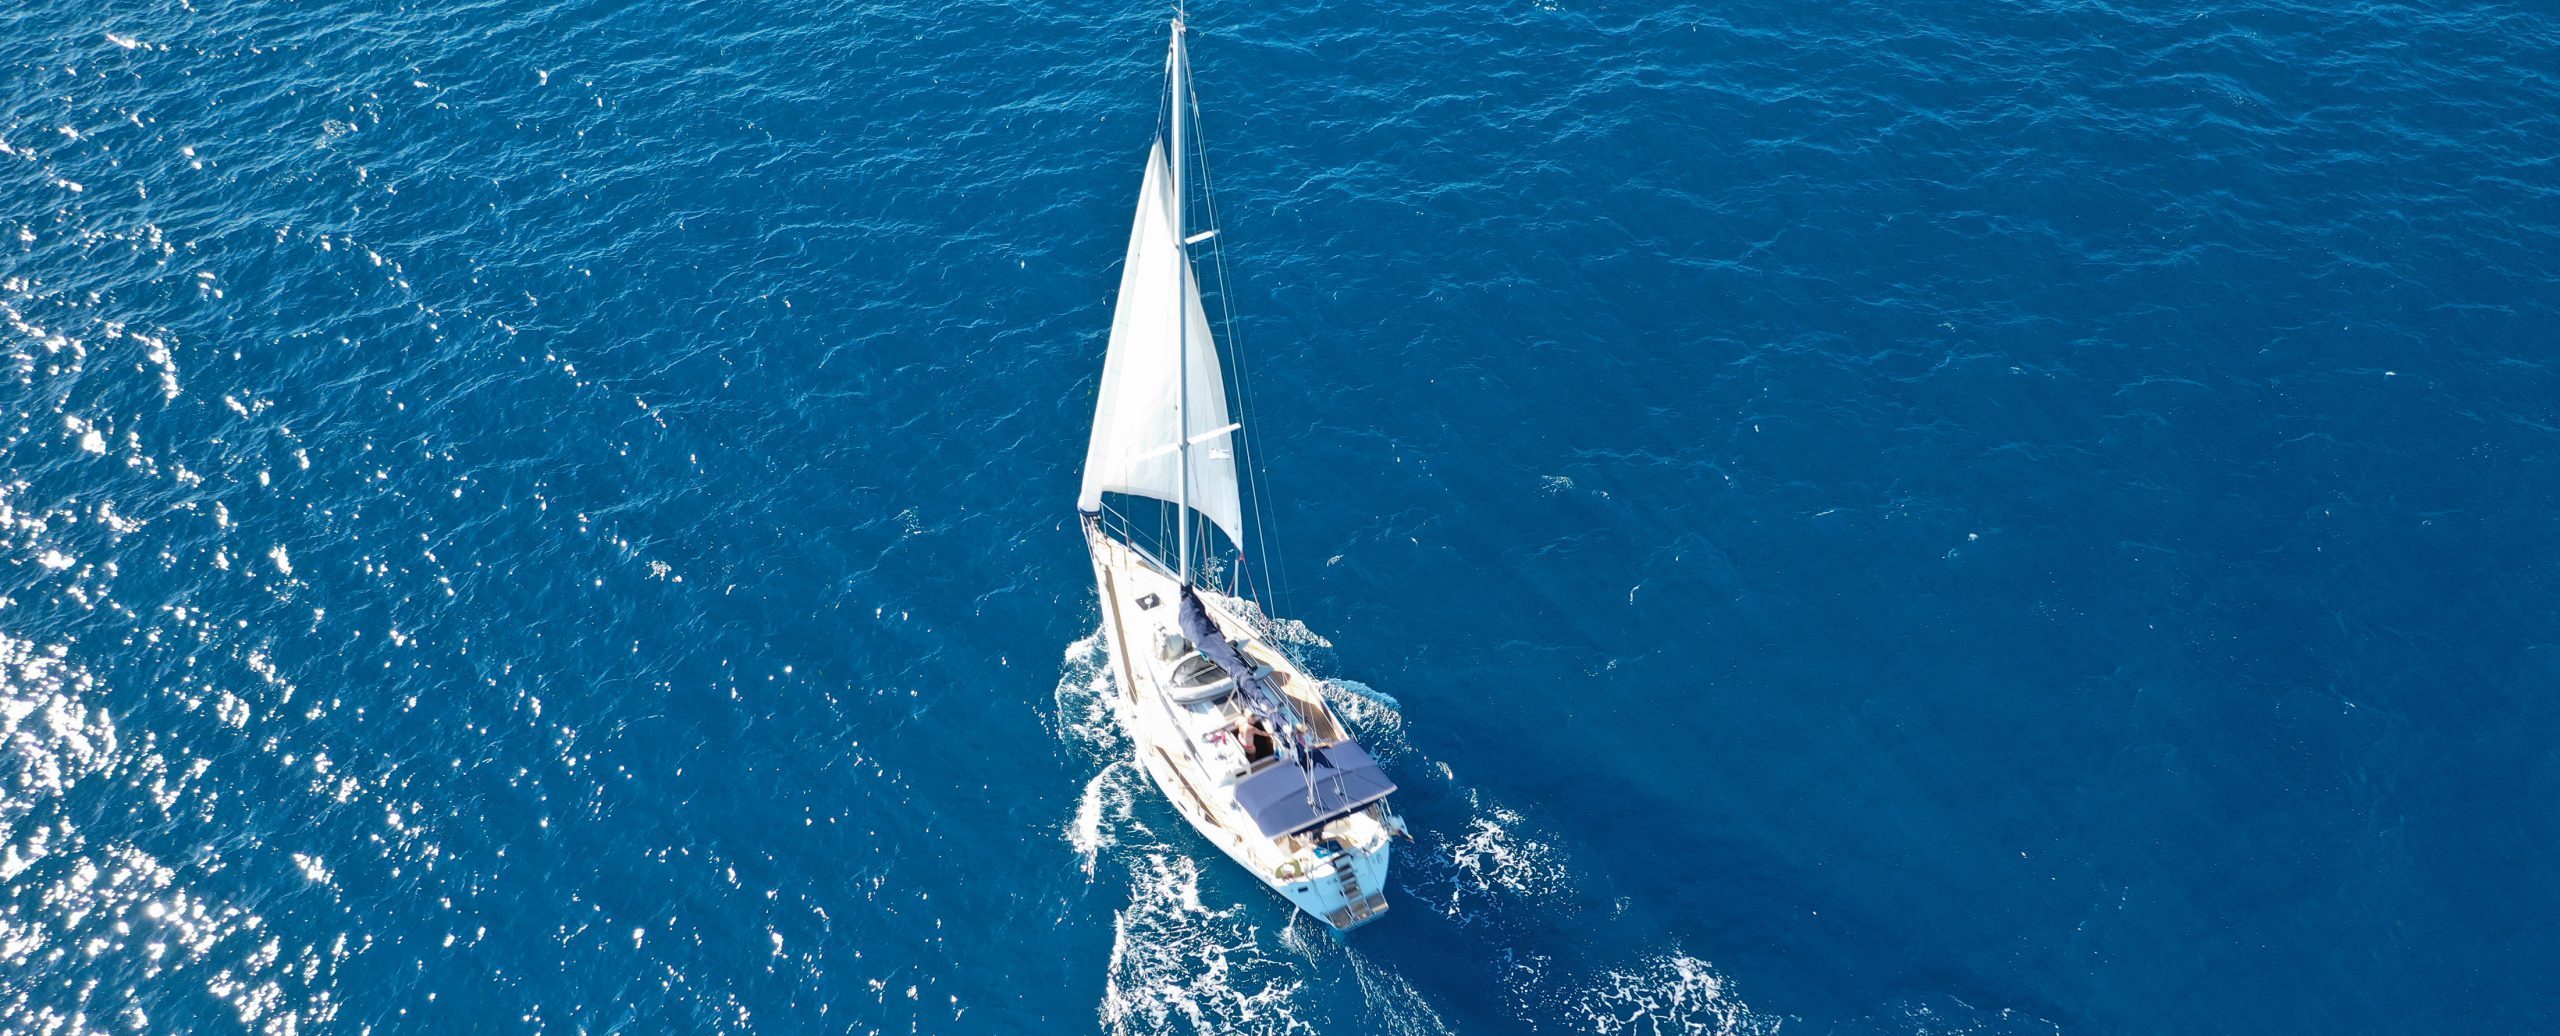 Sailing or Yachting in Greece. Arial Image of Elysium Yachting